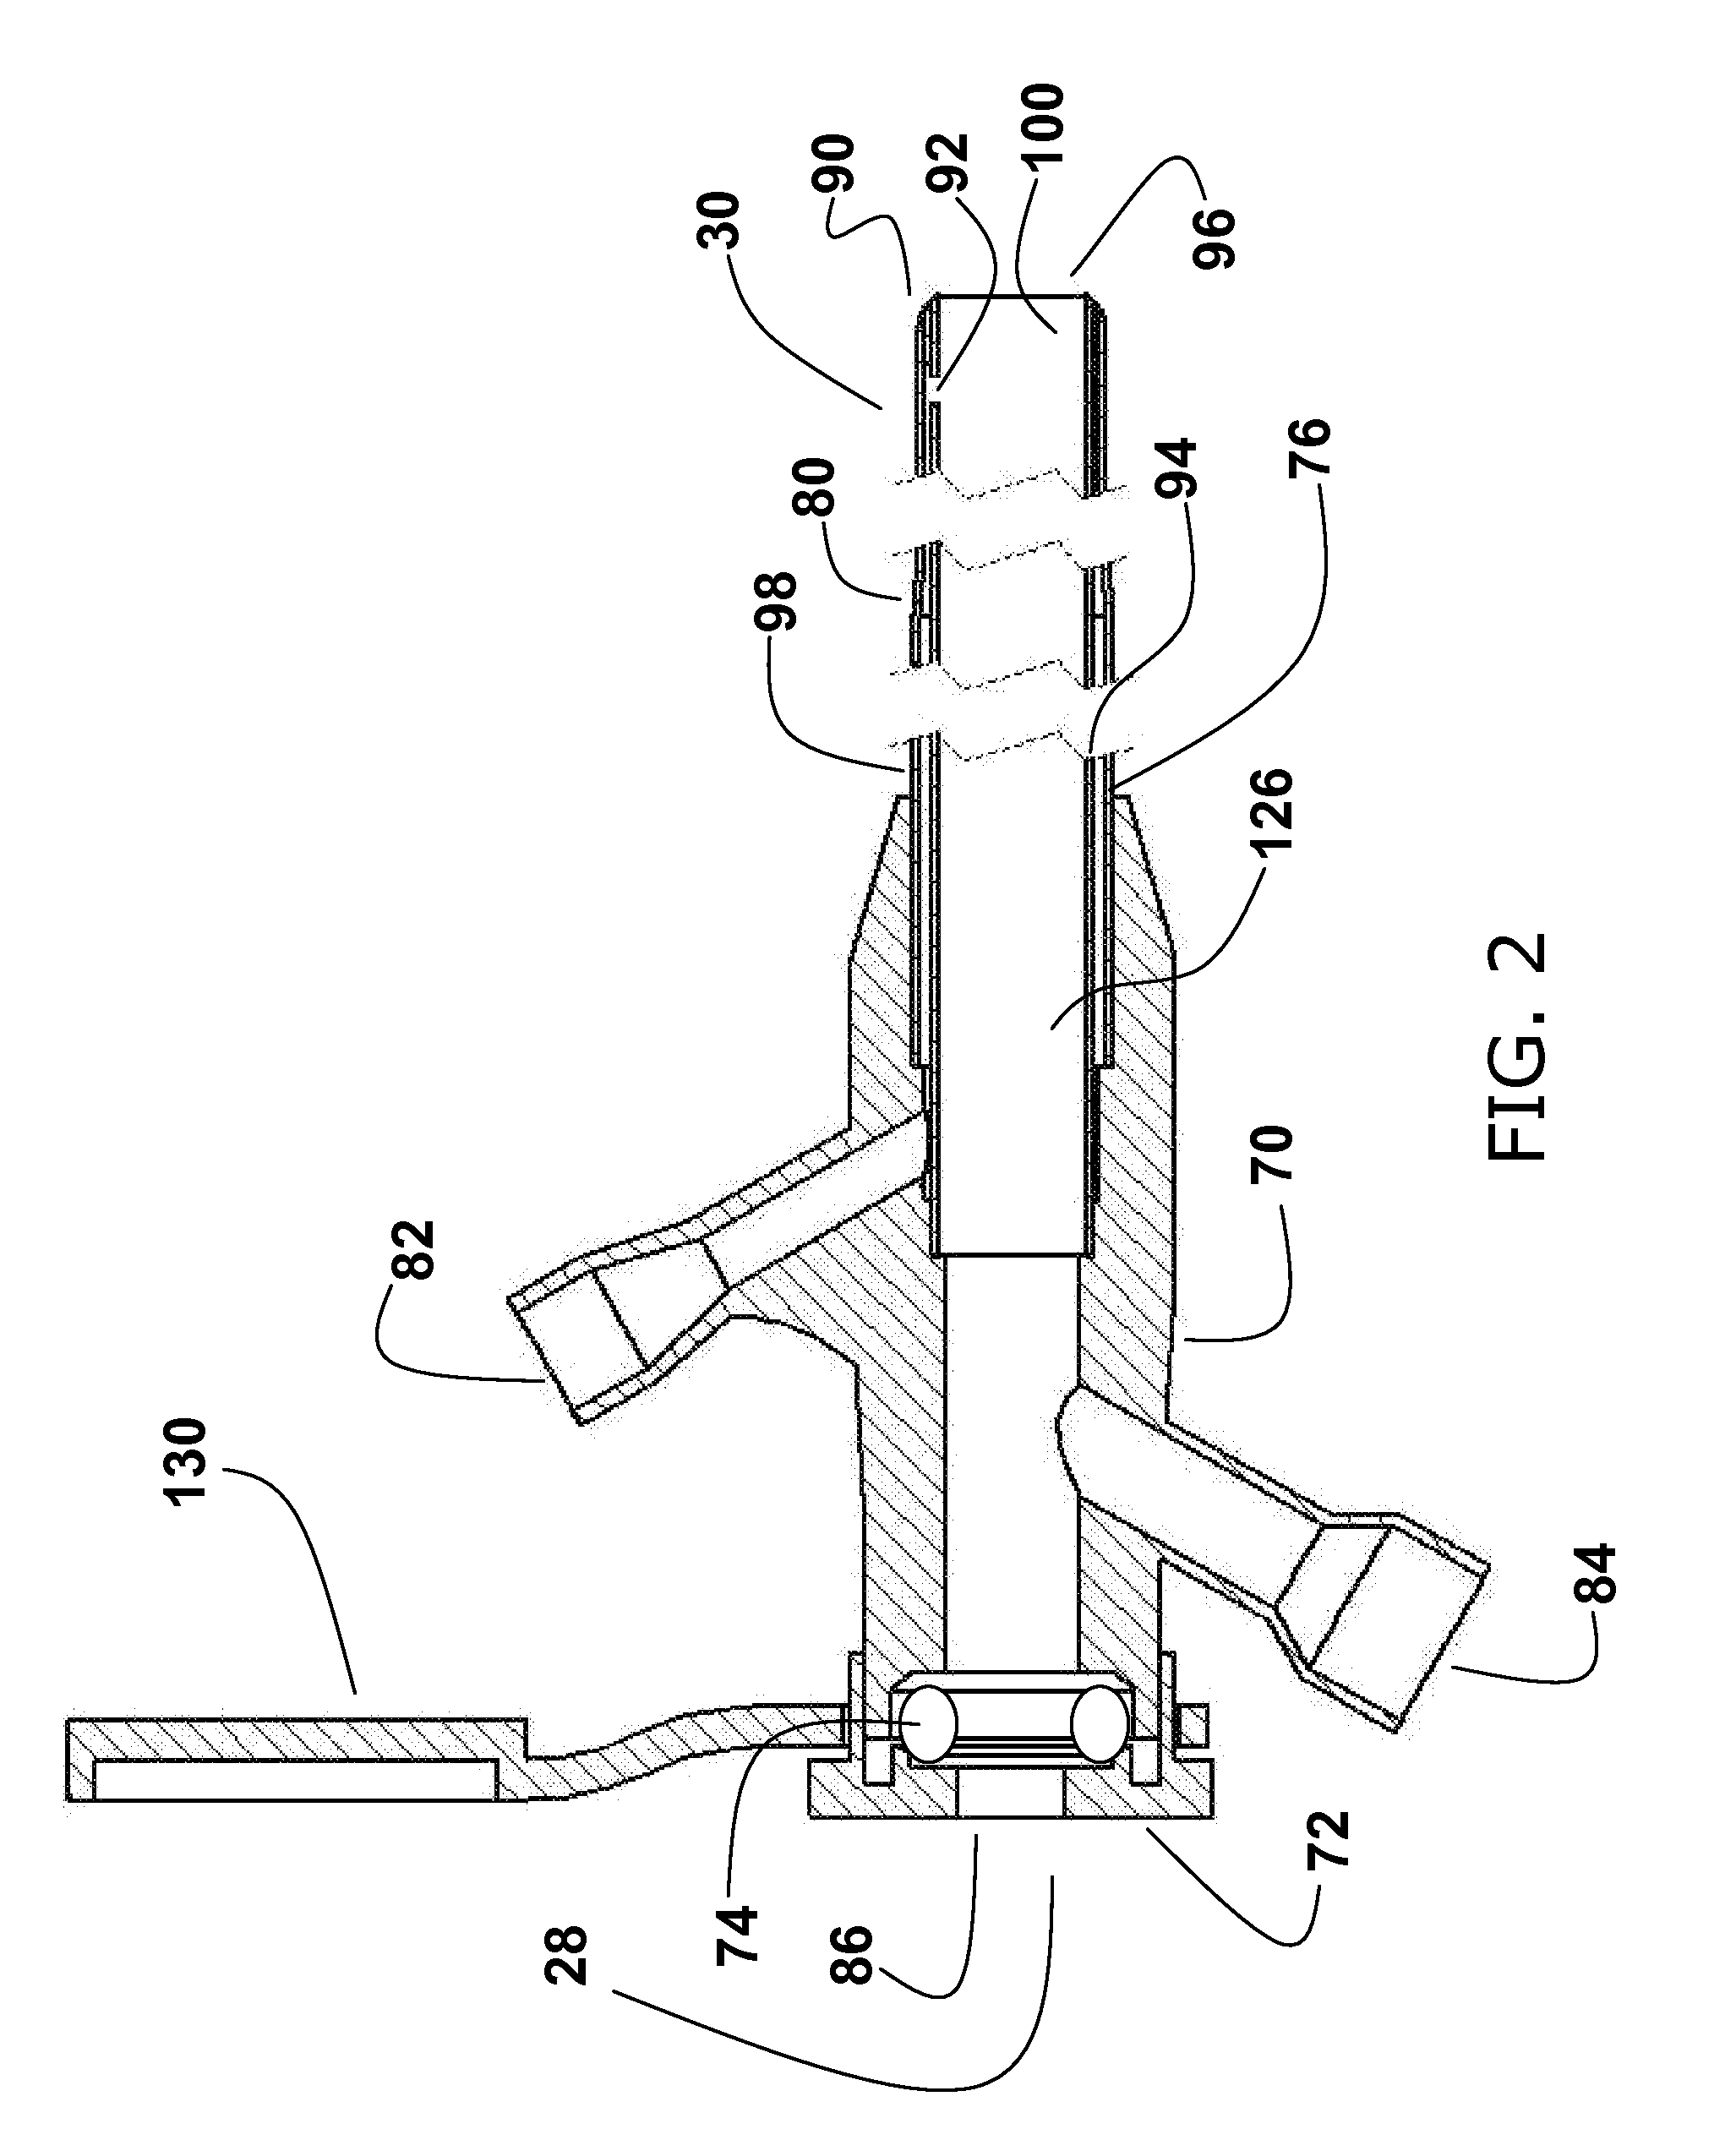 Neurovascular microcatheter device, system and methods for use thereof